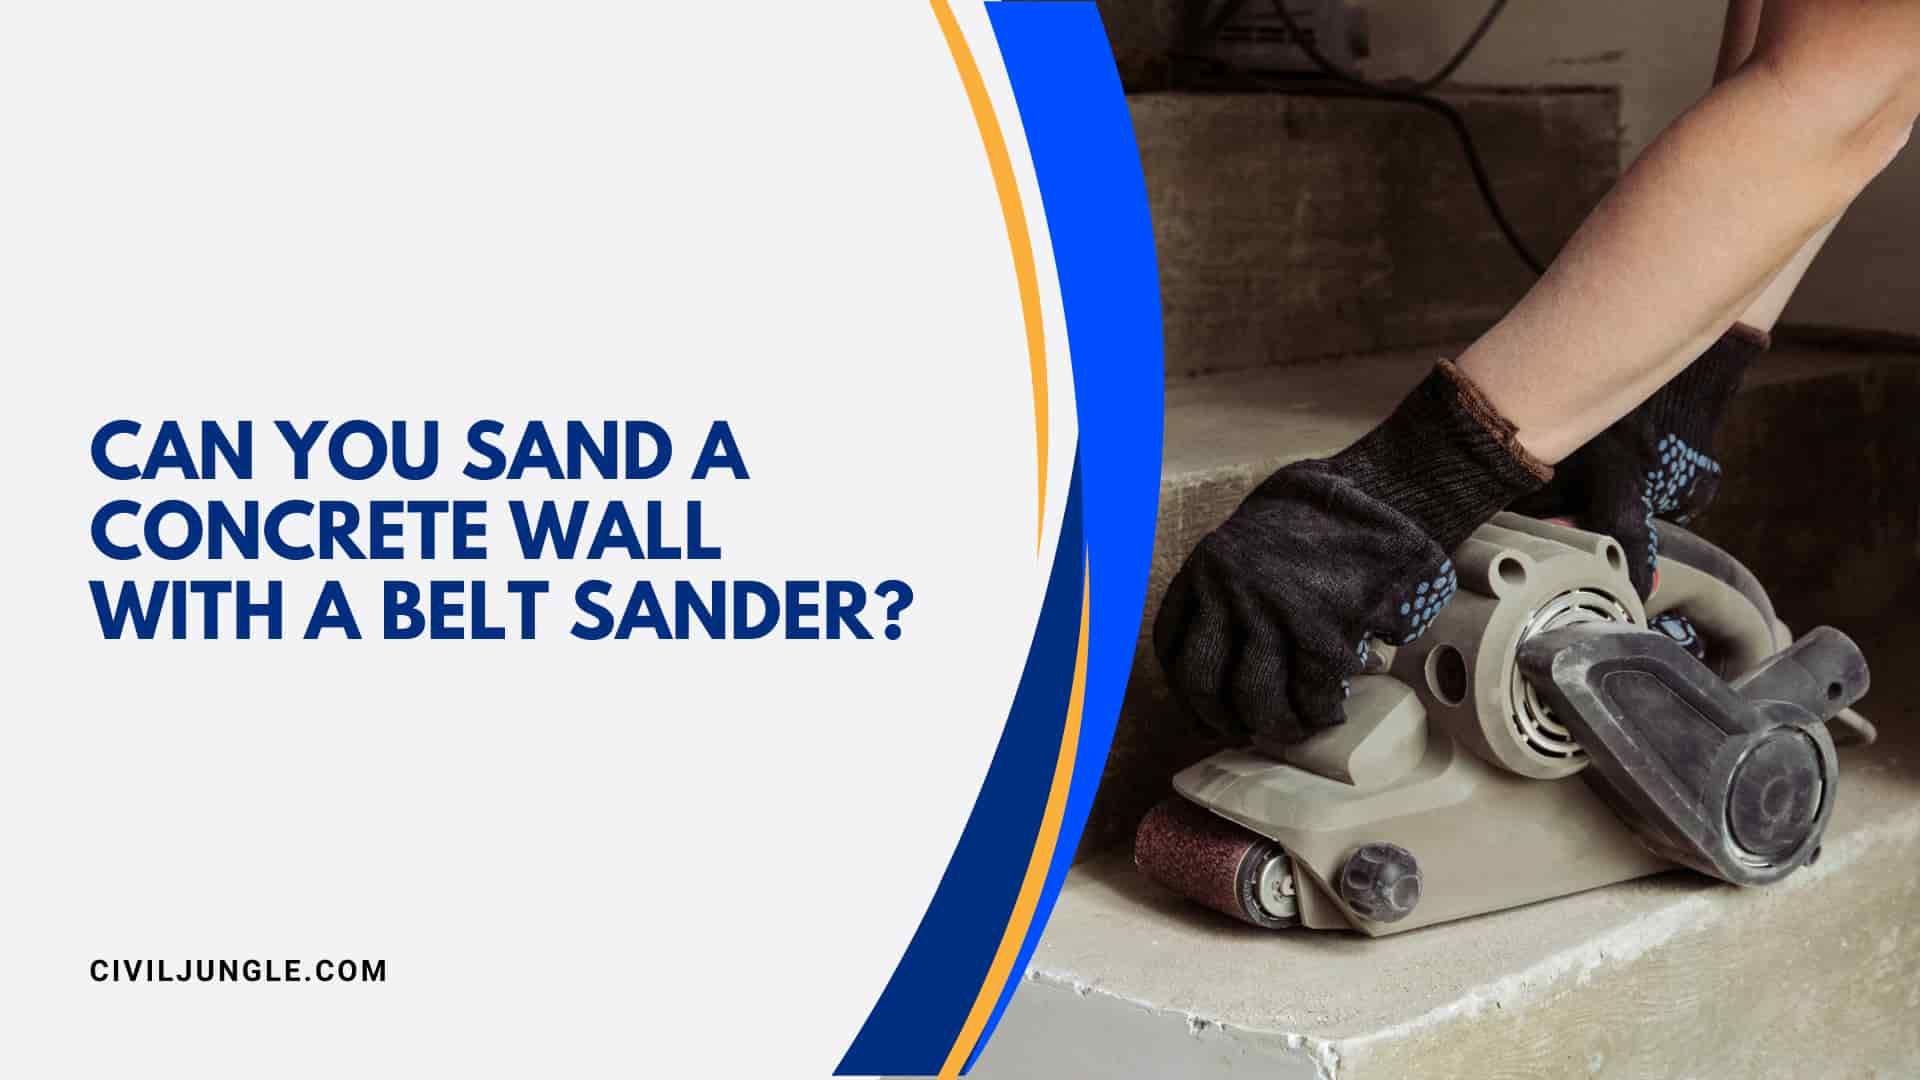 Can You Sand A Concrete Wall With A Belt Sander?